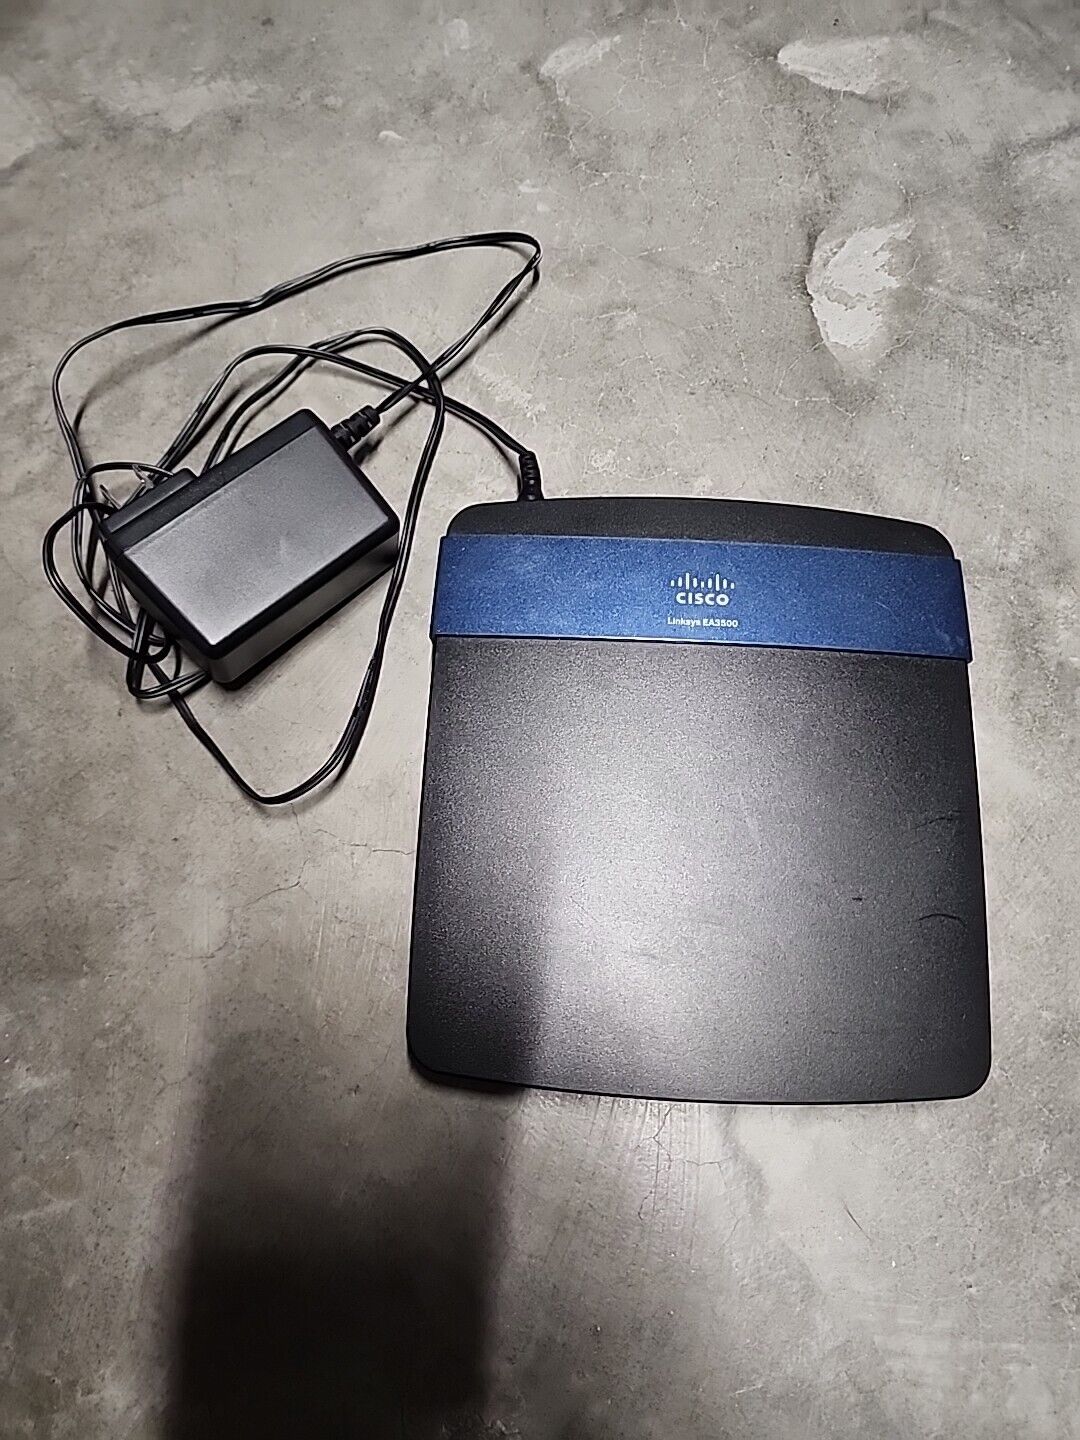 CISCO Linksys EA3500 Dual Band N750 Router 